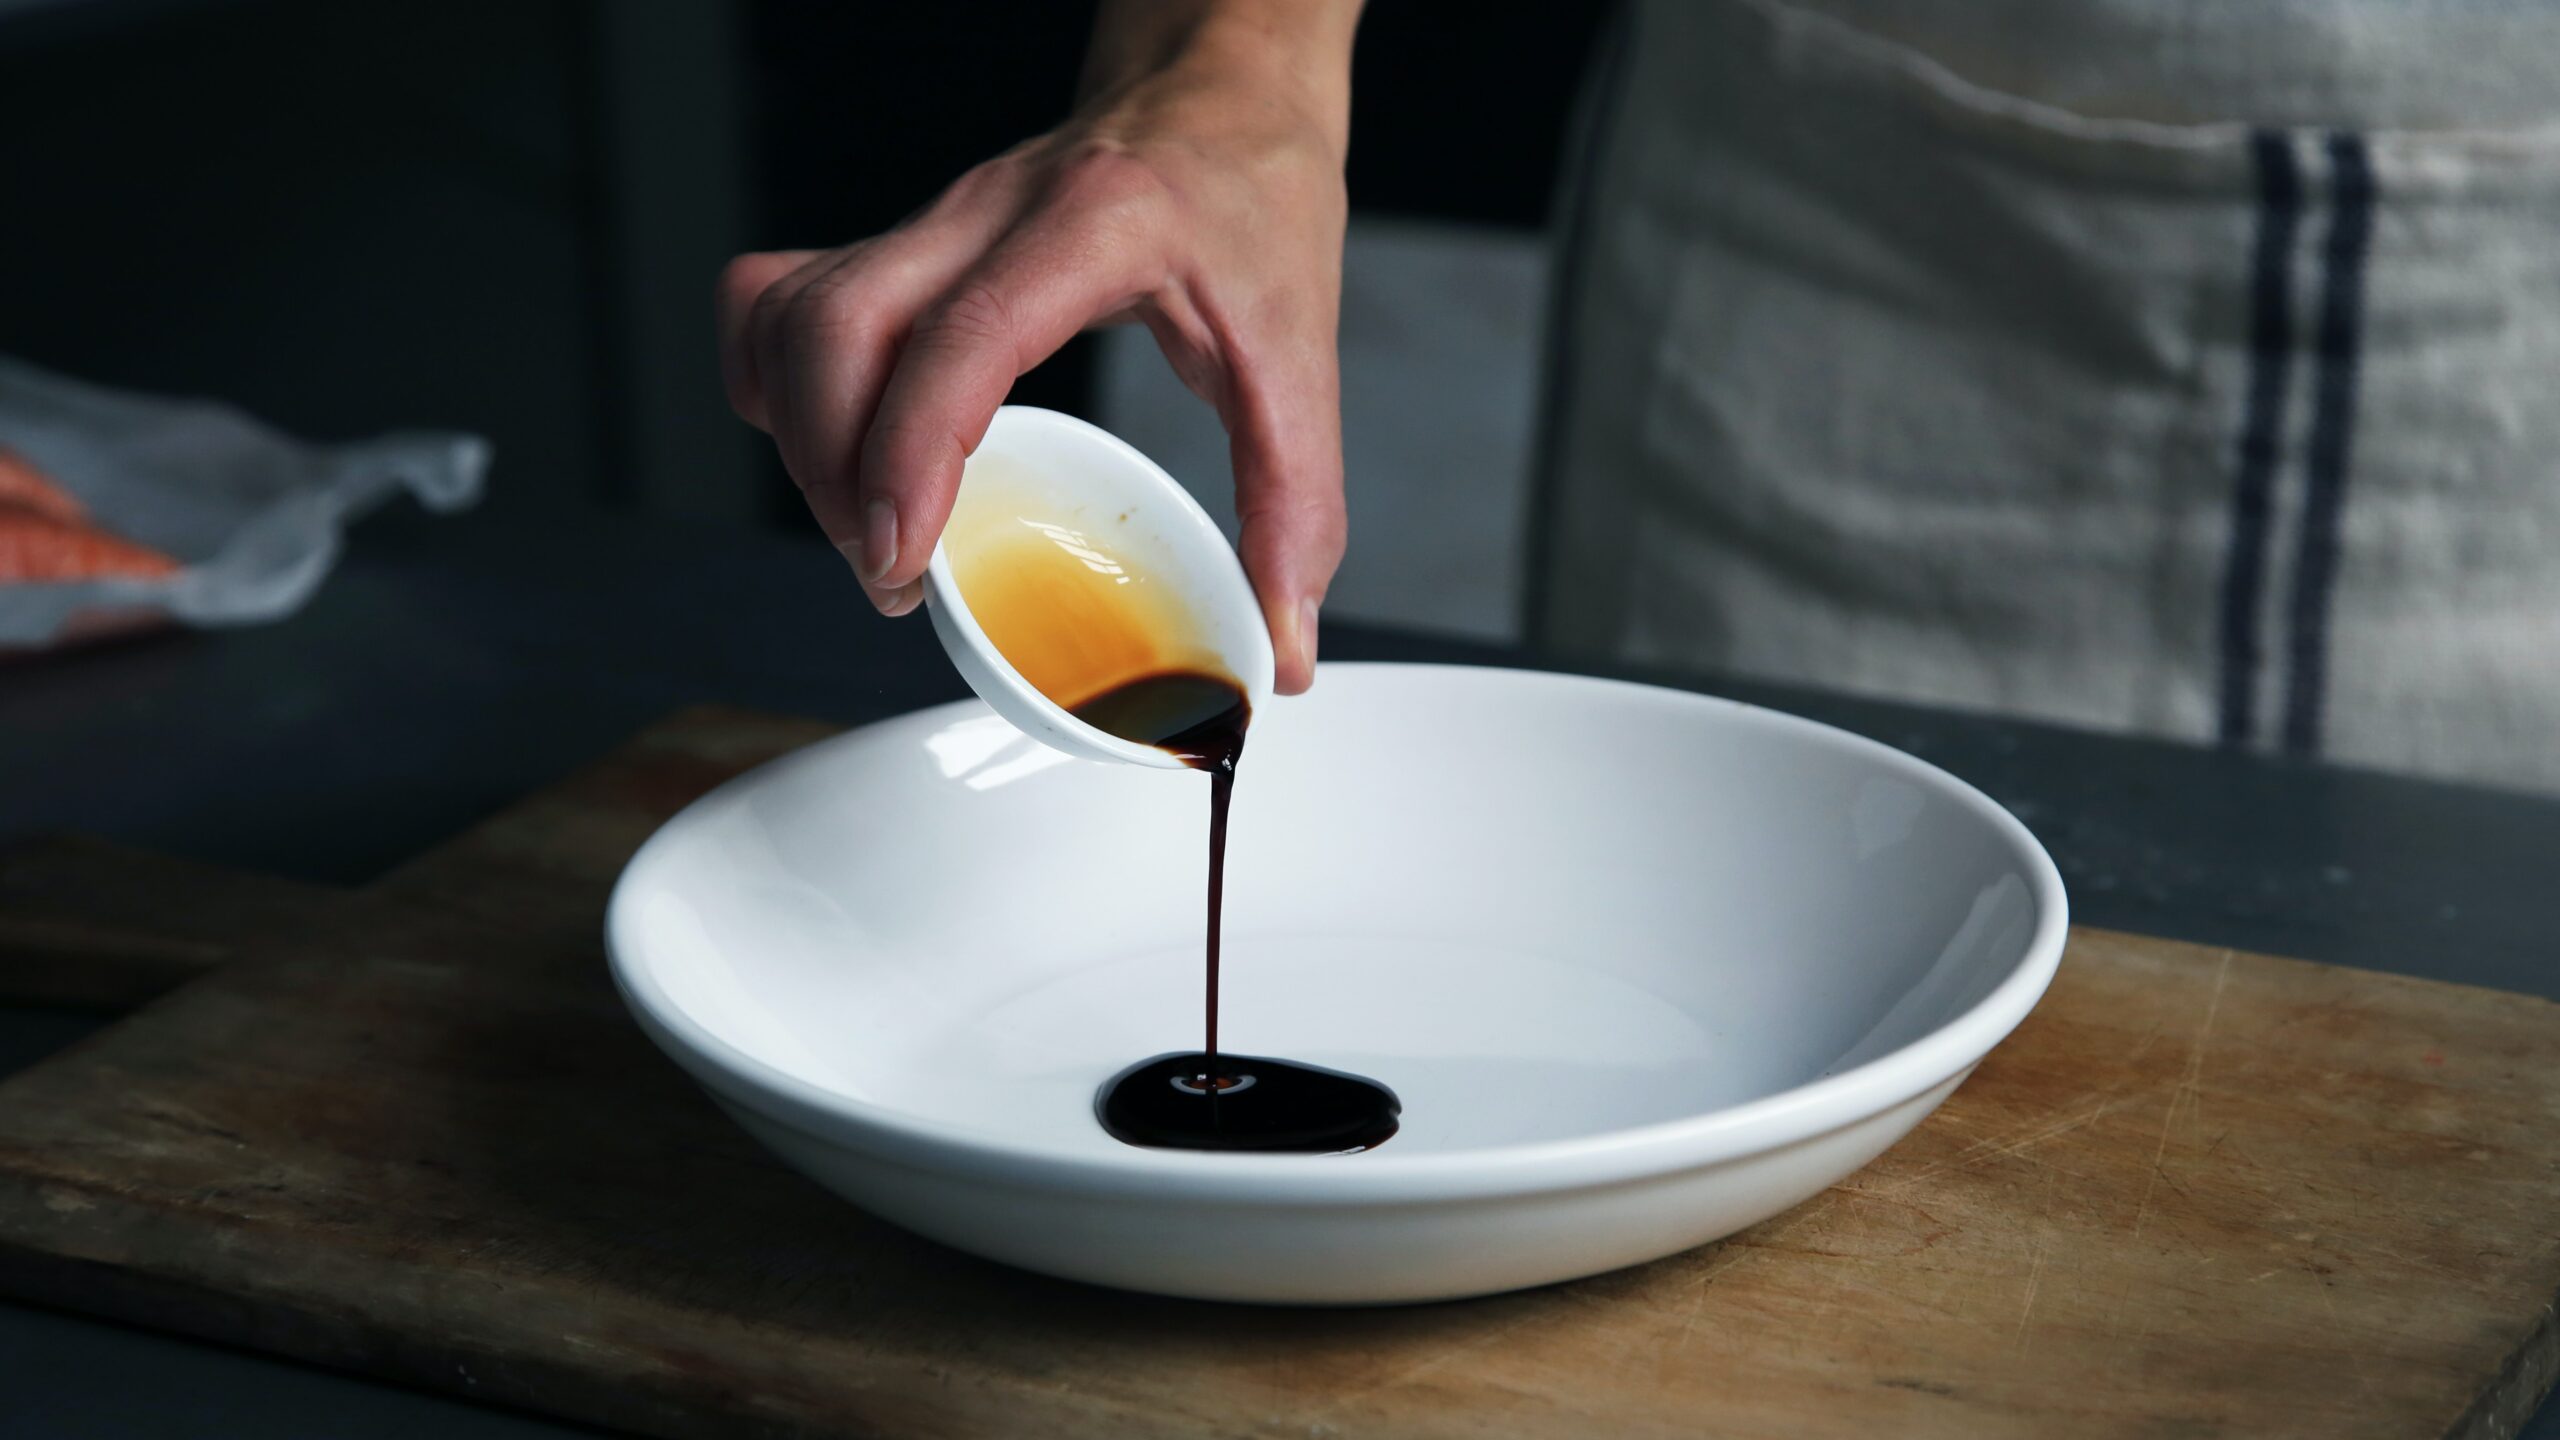 Dark sauce being pours into a plate